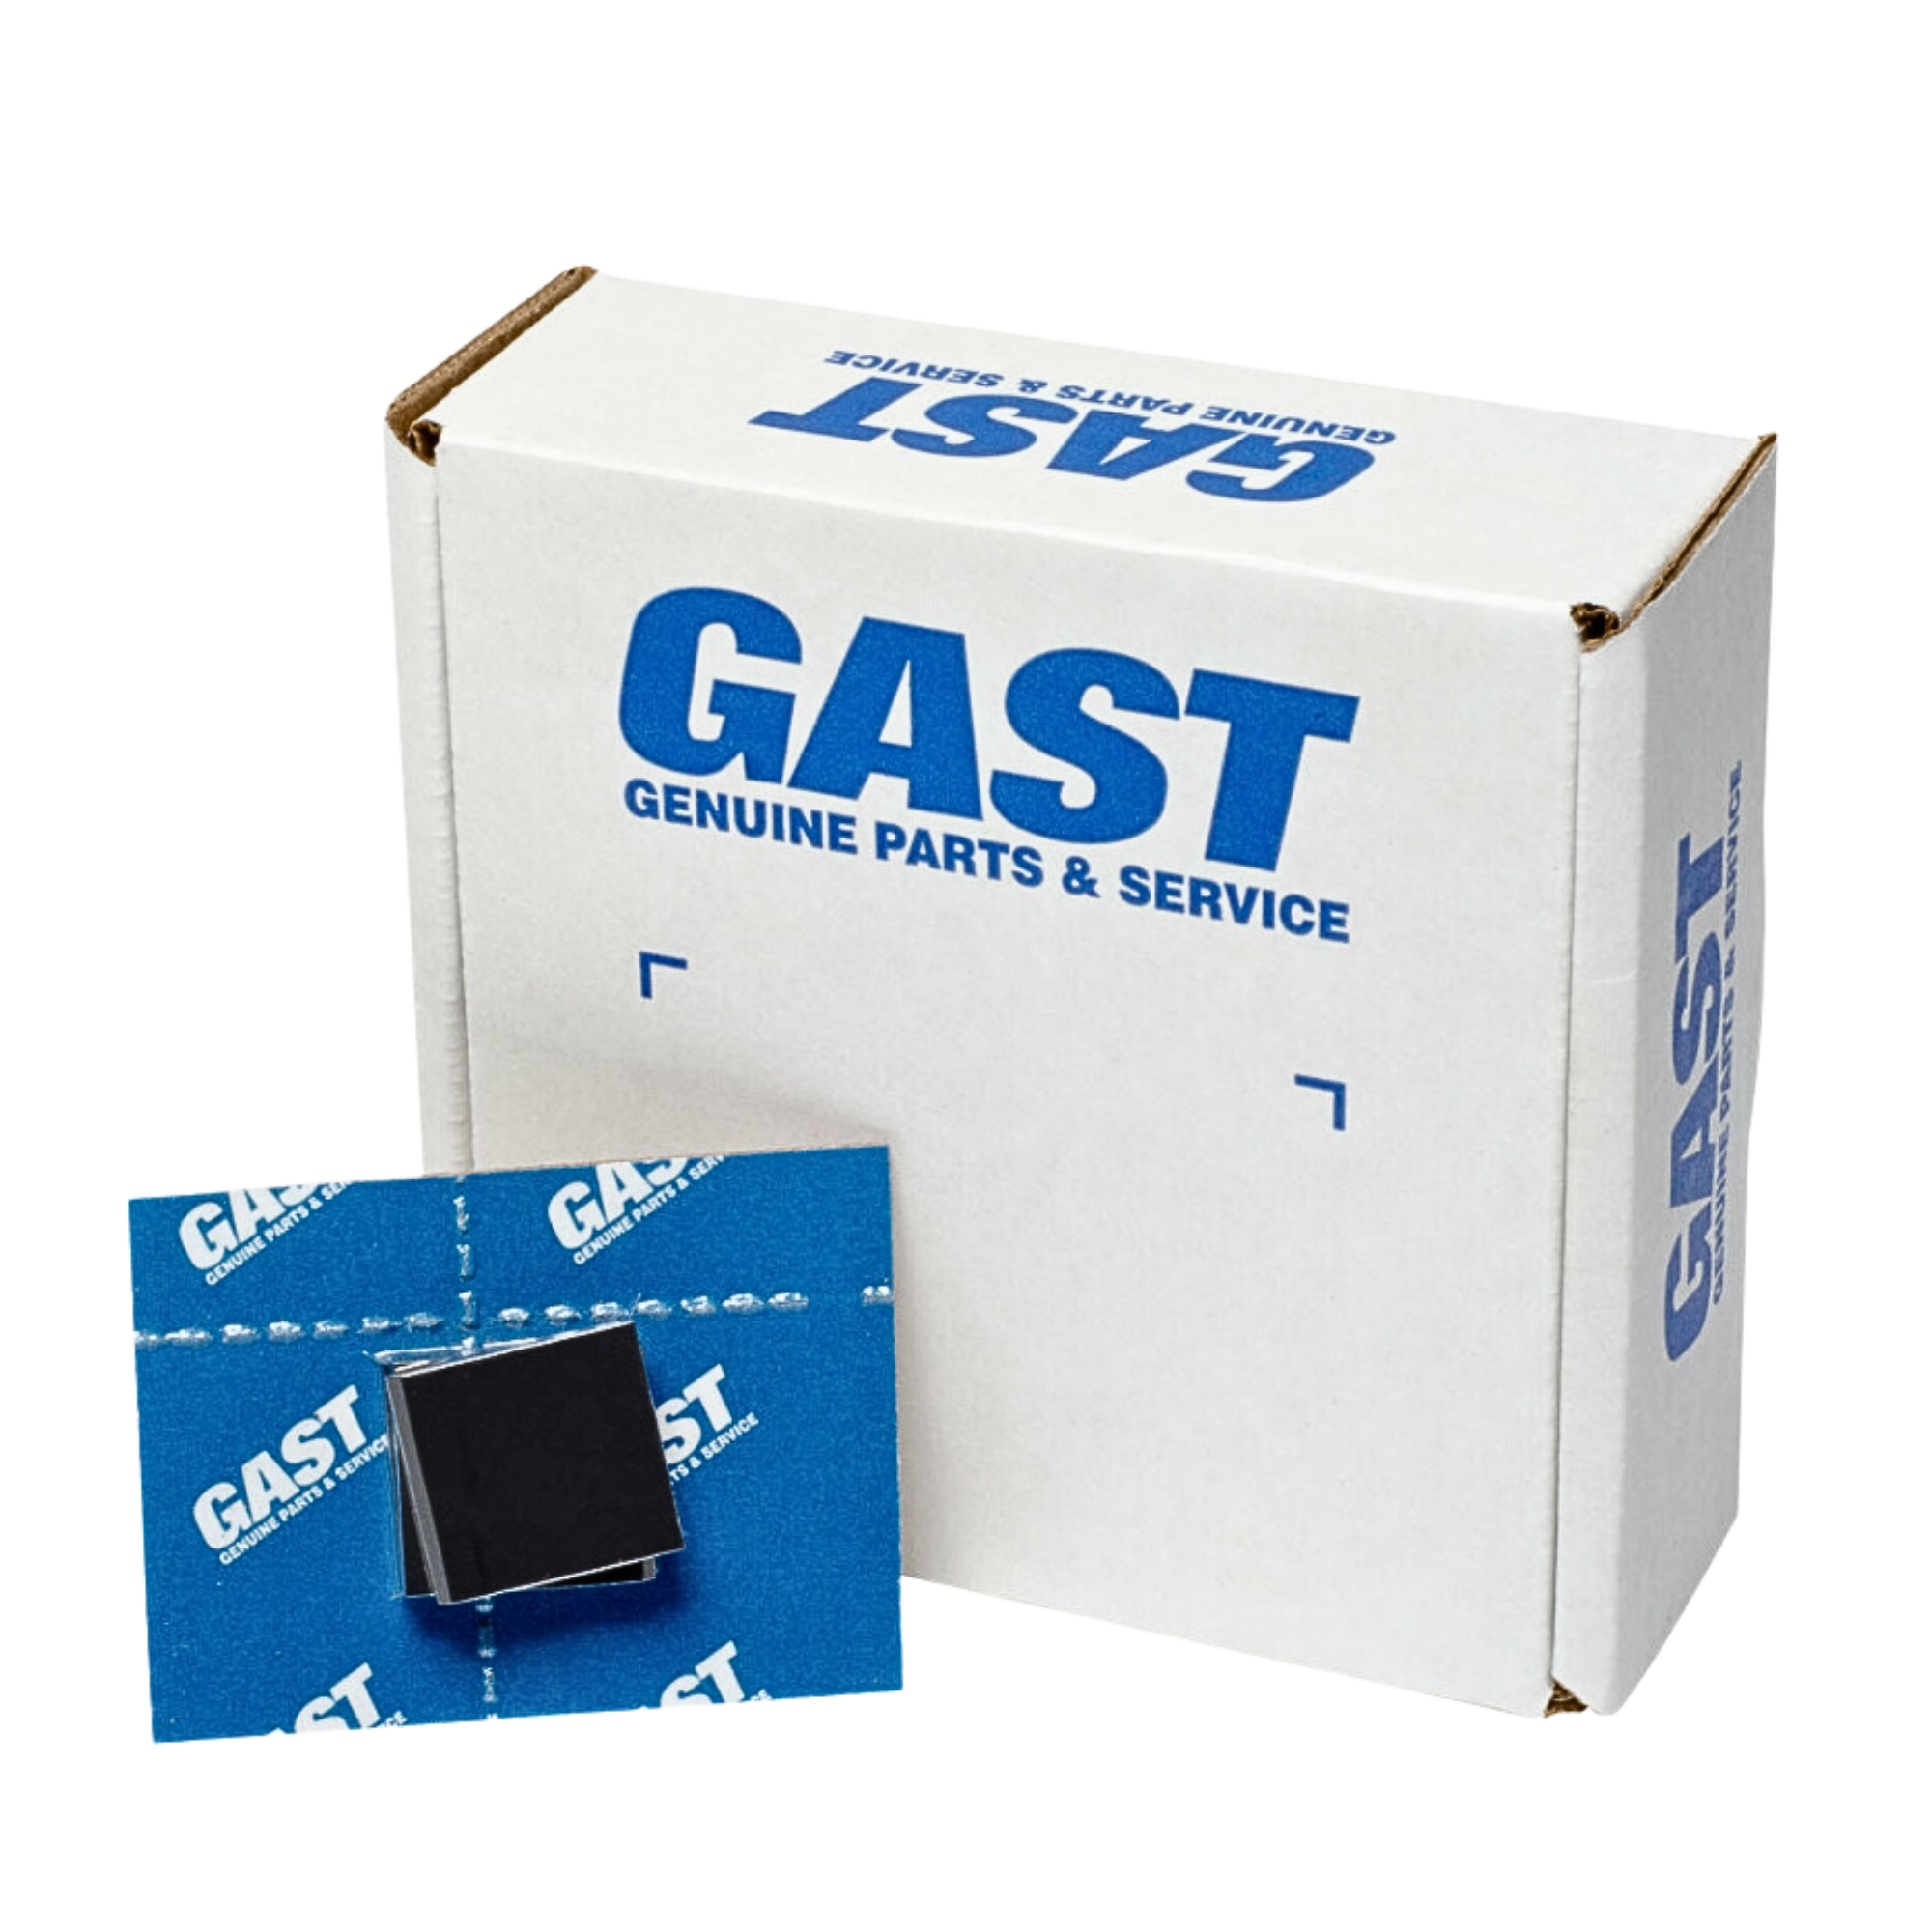 Gast | 0323/0523 Oil-Less Service Kit | K478A used on gast product line